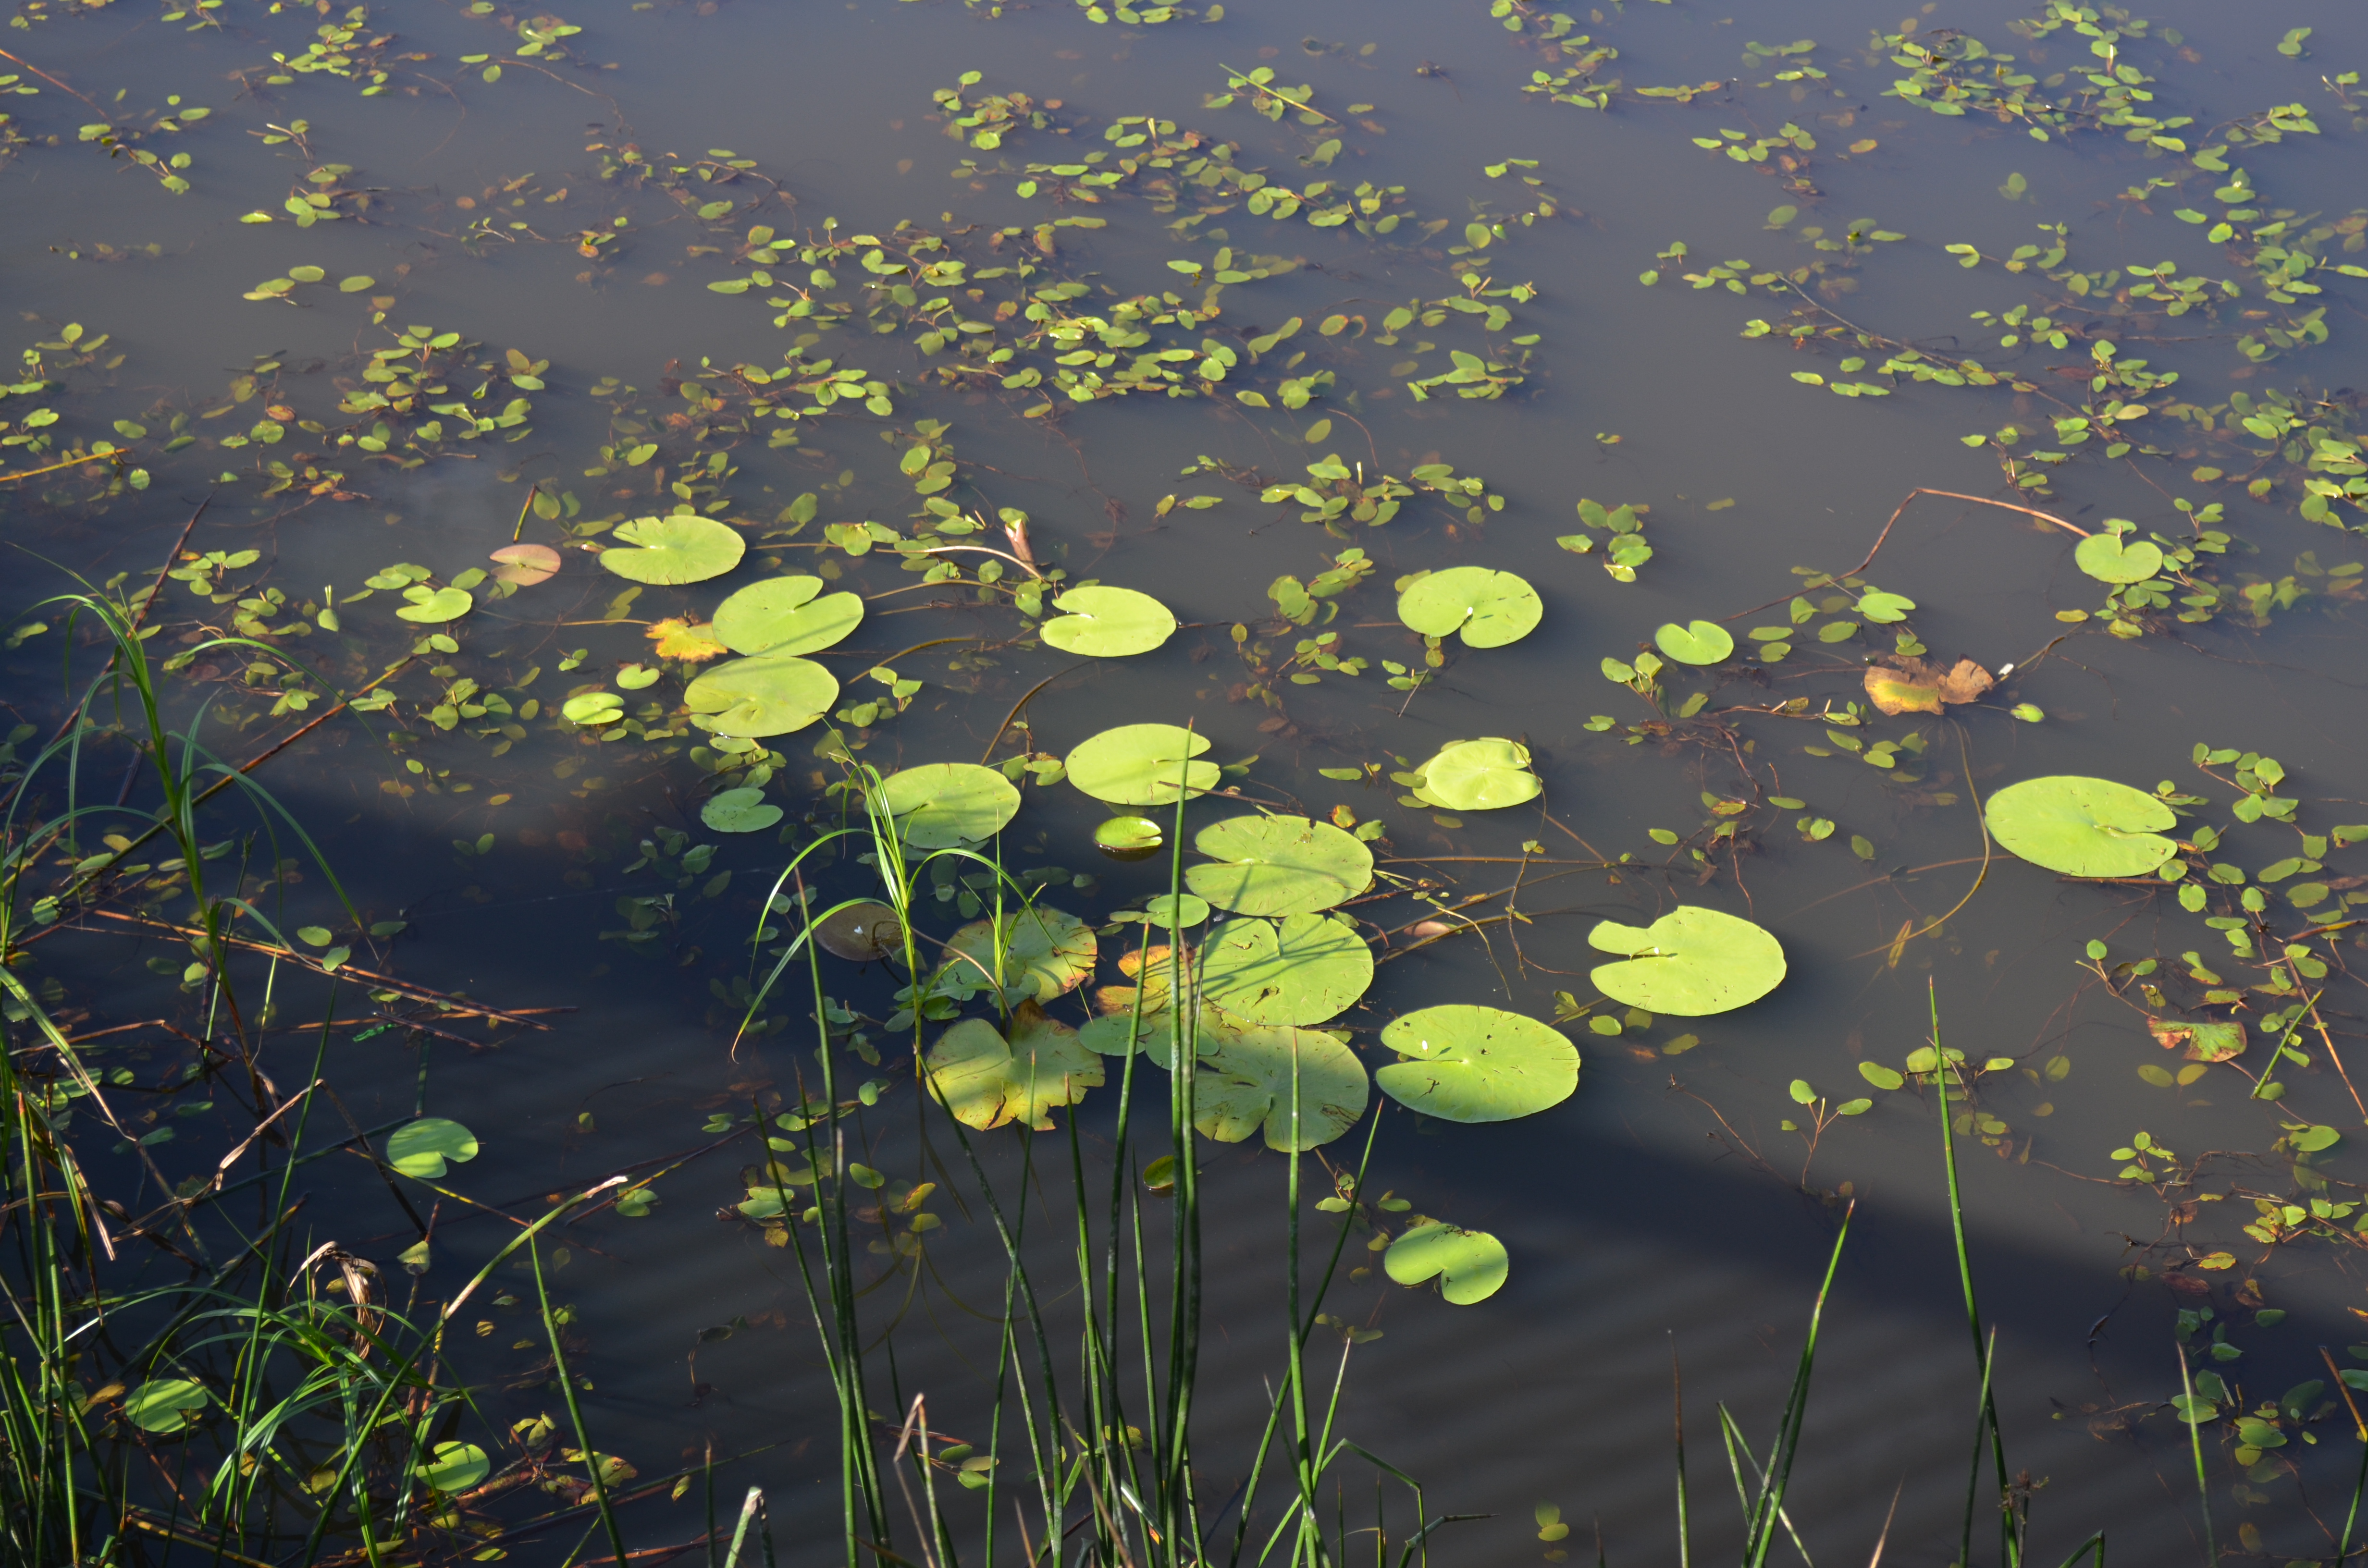 Aquatic plants on the surface of a lake